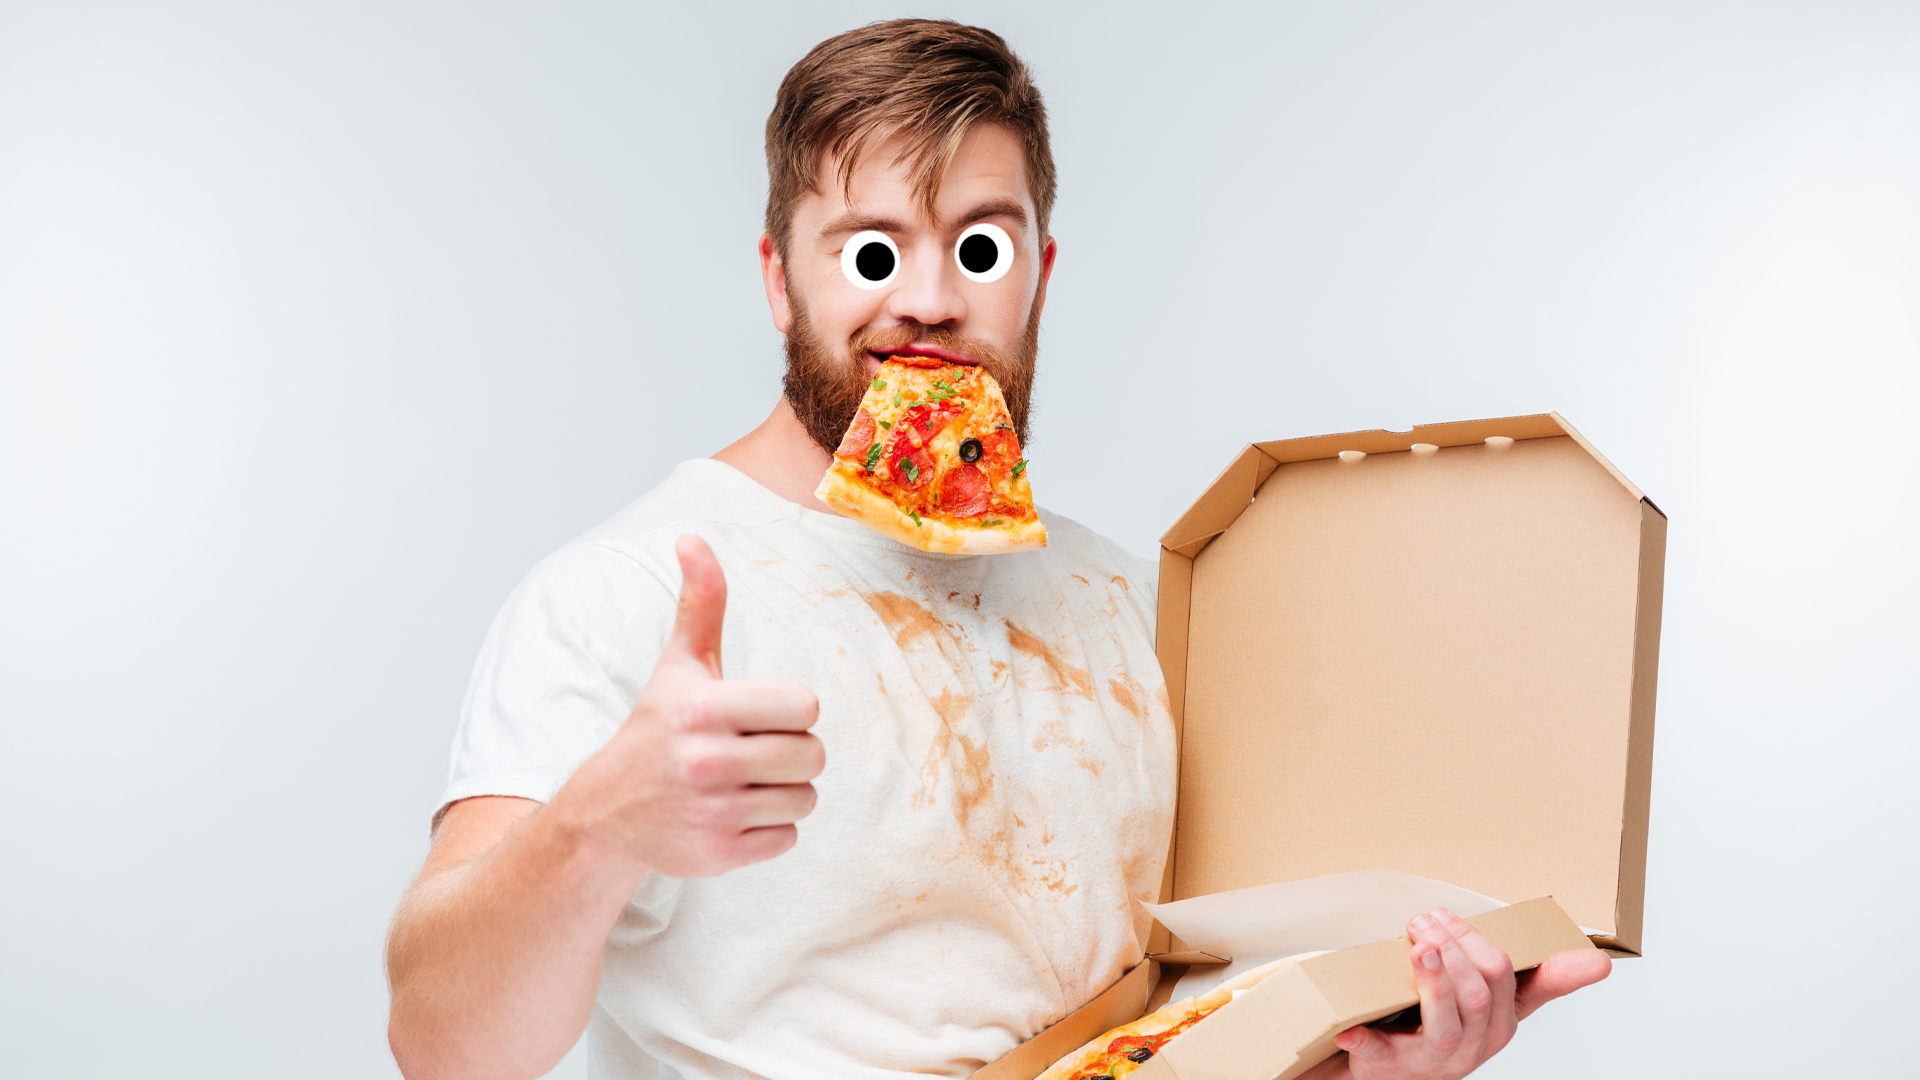 A man eating a pizza